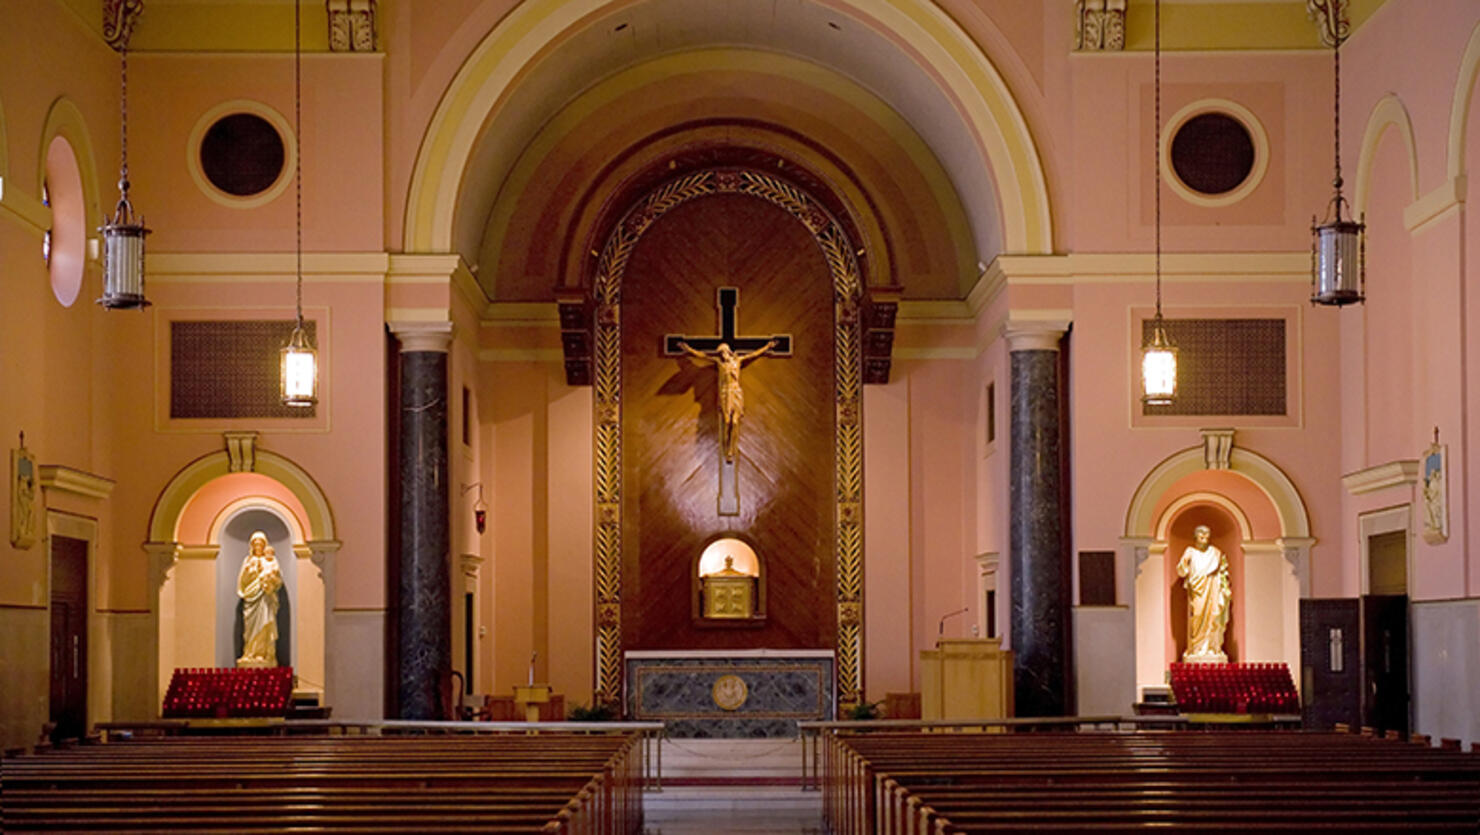 Chapel of catholic Cathedral Basilica of St Peter and Paul, Philadelphia